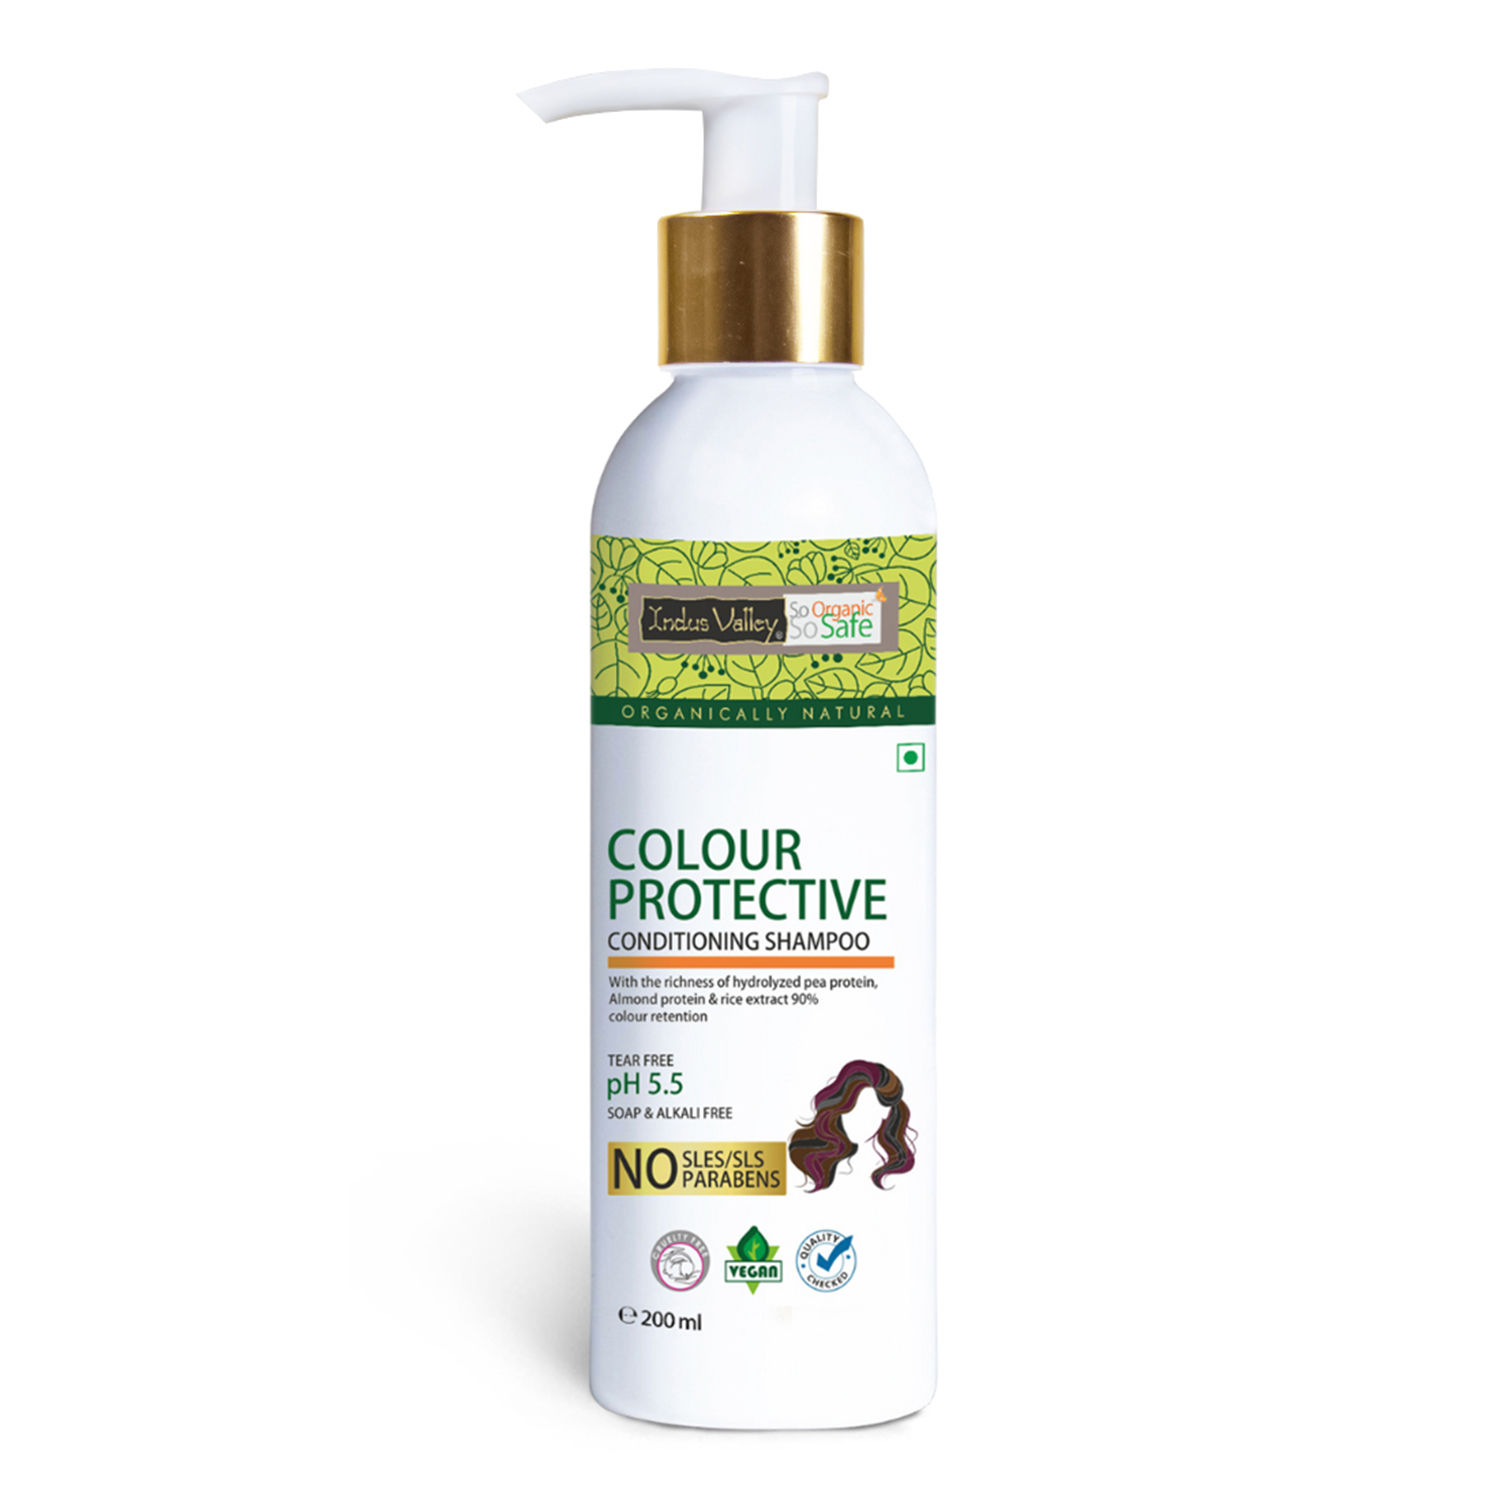 Indus Valley Colour Protective Conditioning Shampoo